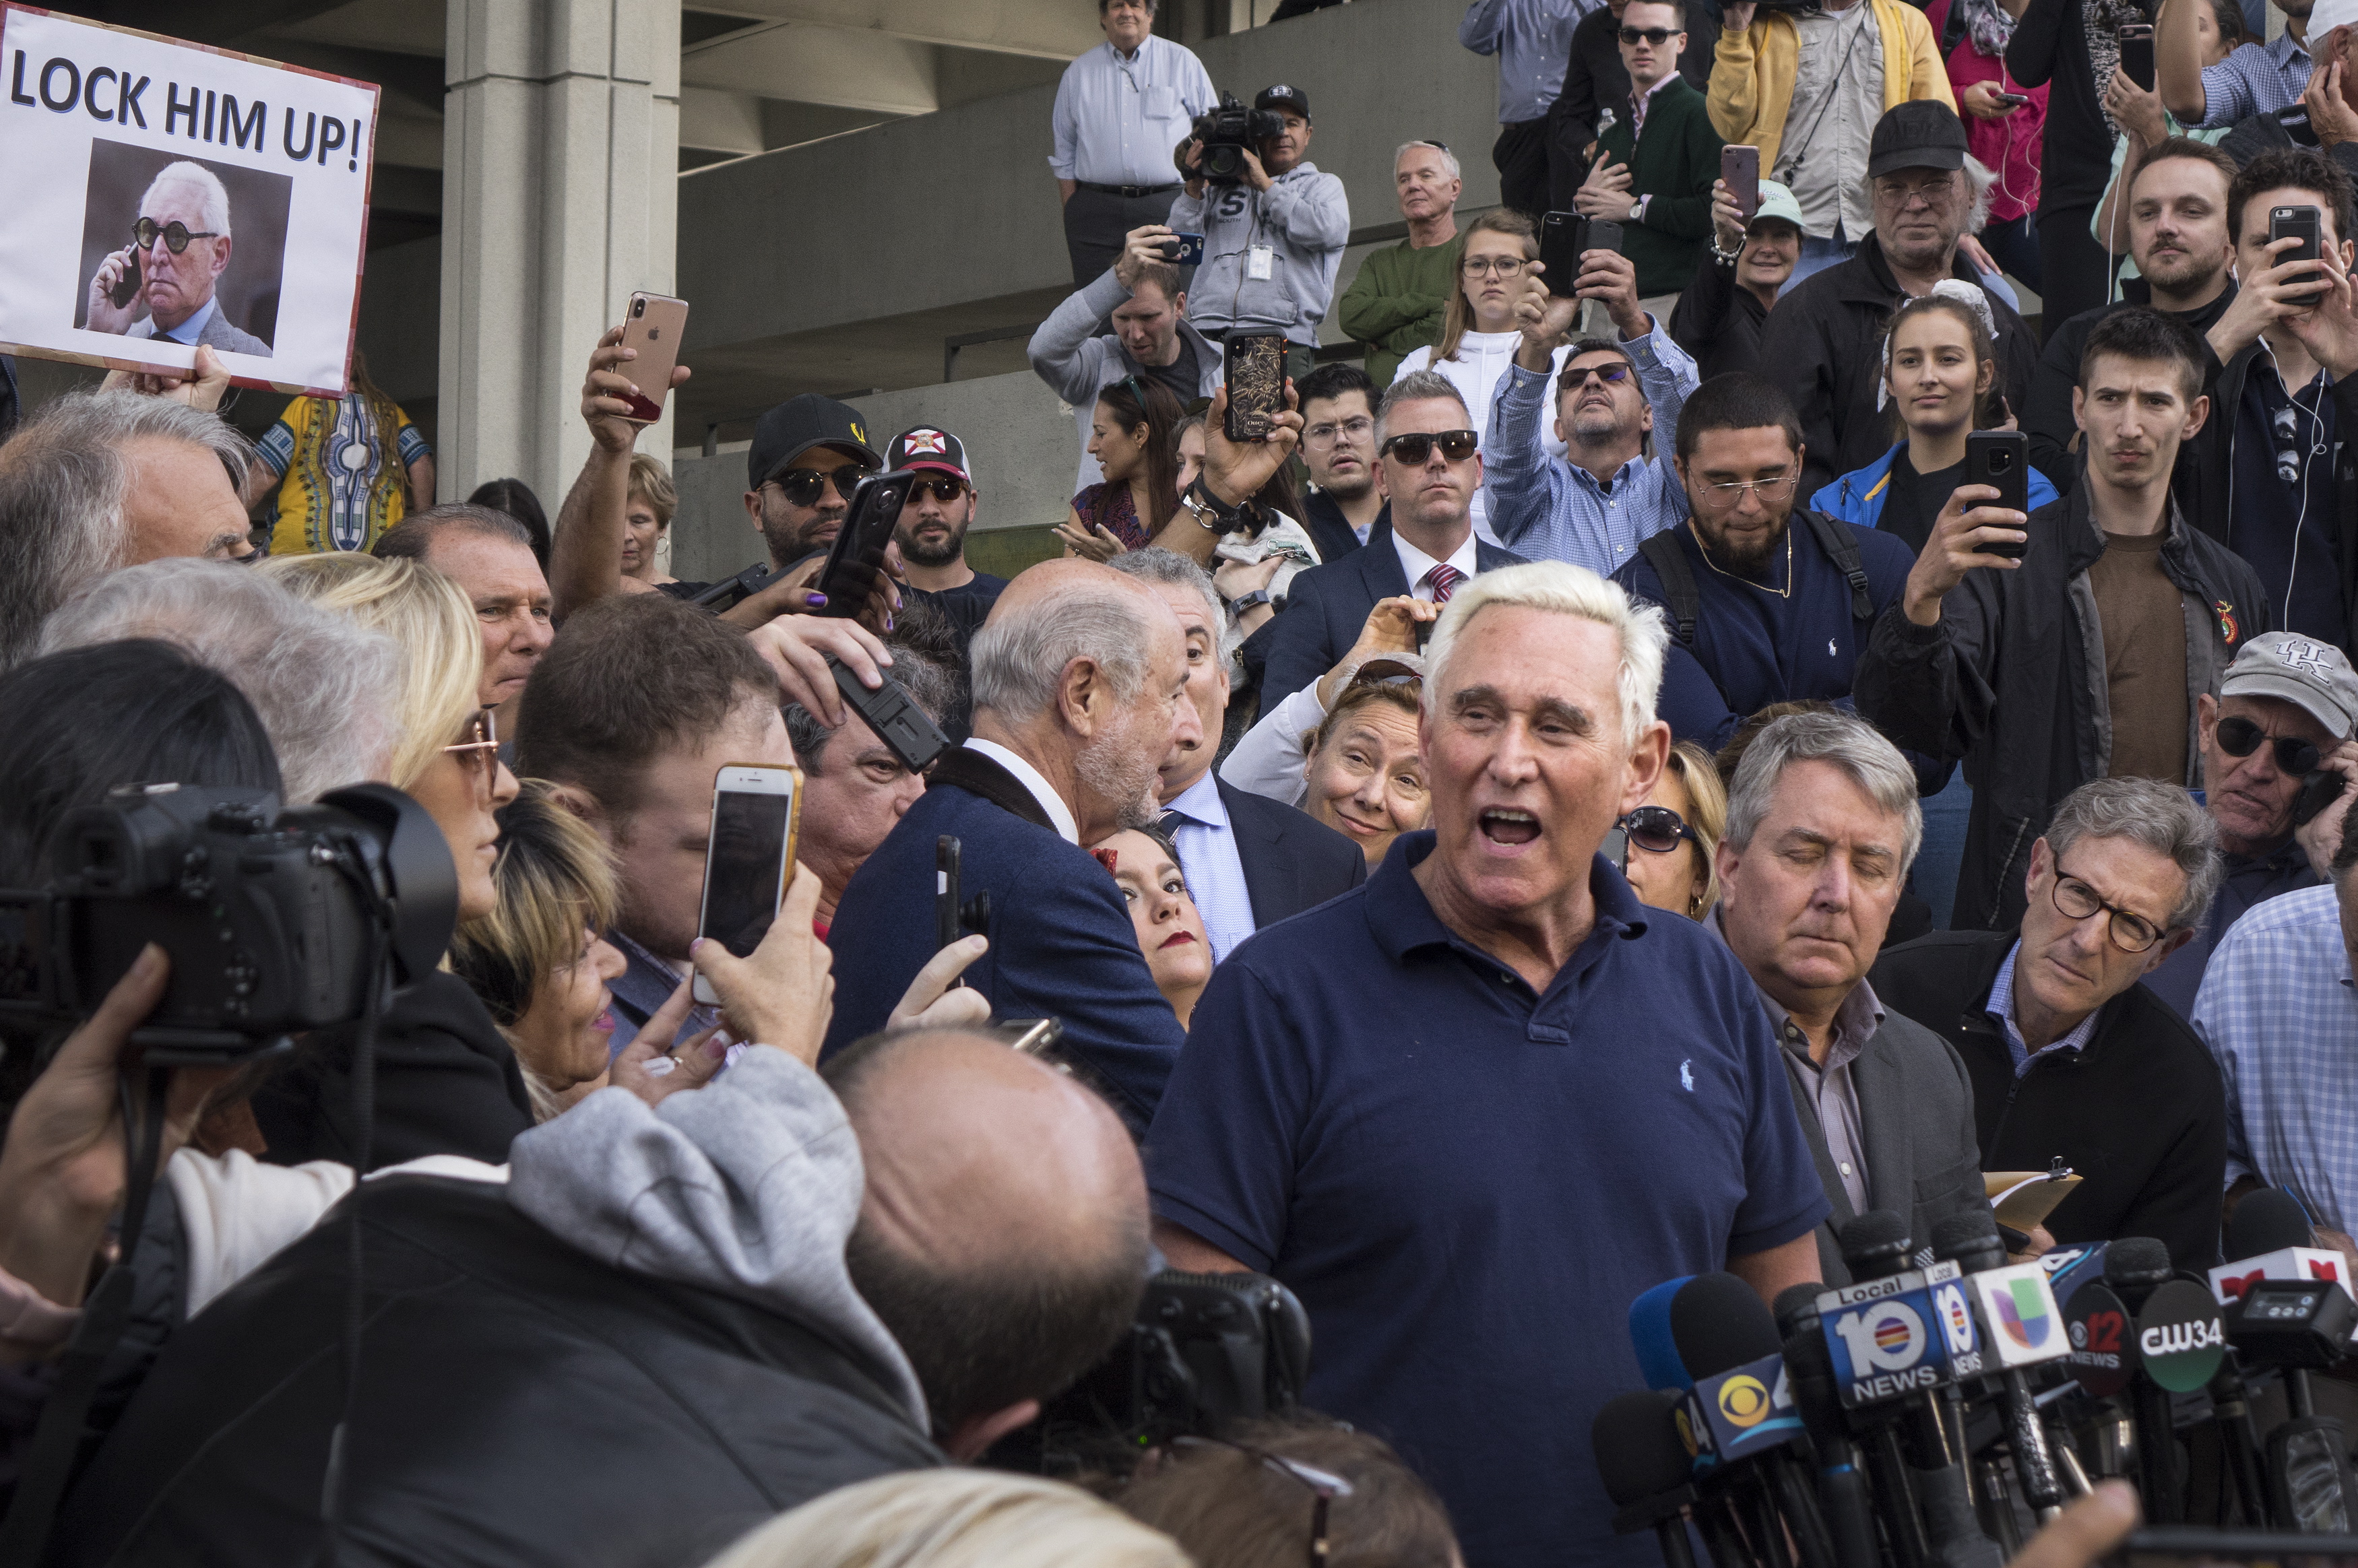 epa07319271 Roger Stone (C) speaks with the media outside the US Federal Building and Courthouse in Fort Lauderdale, Florida, USA 25 January 2019. The American political consultant, lobbyist and strategist Roger Stone of Fort Lauderdale, Florida, was arrested in Fort Lauderdale today following an indictment by a federal grand jury on 24 January 2019, in the District of Columbia. The indictment, which was unsealed upon arrest, contains seven counts: one count of obstruction of an official proceeding, five counts of false statements, and one count of witness tampering. Stone will make an initial appearance today before U.S. Magistrate Judge Lurana S. Snow.  EPA/CRISTOBAL HERRERA